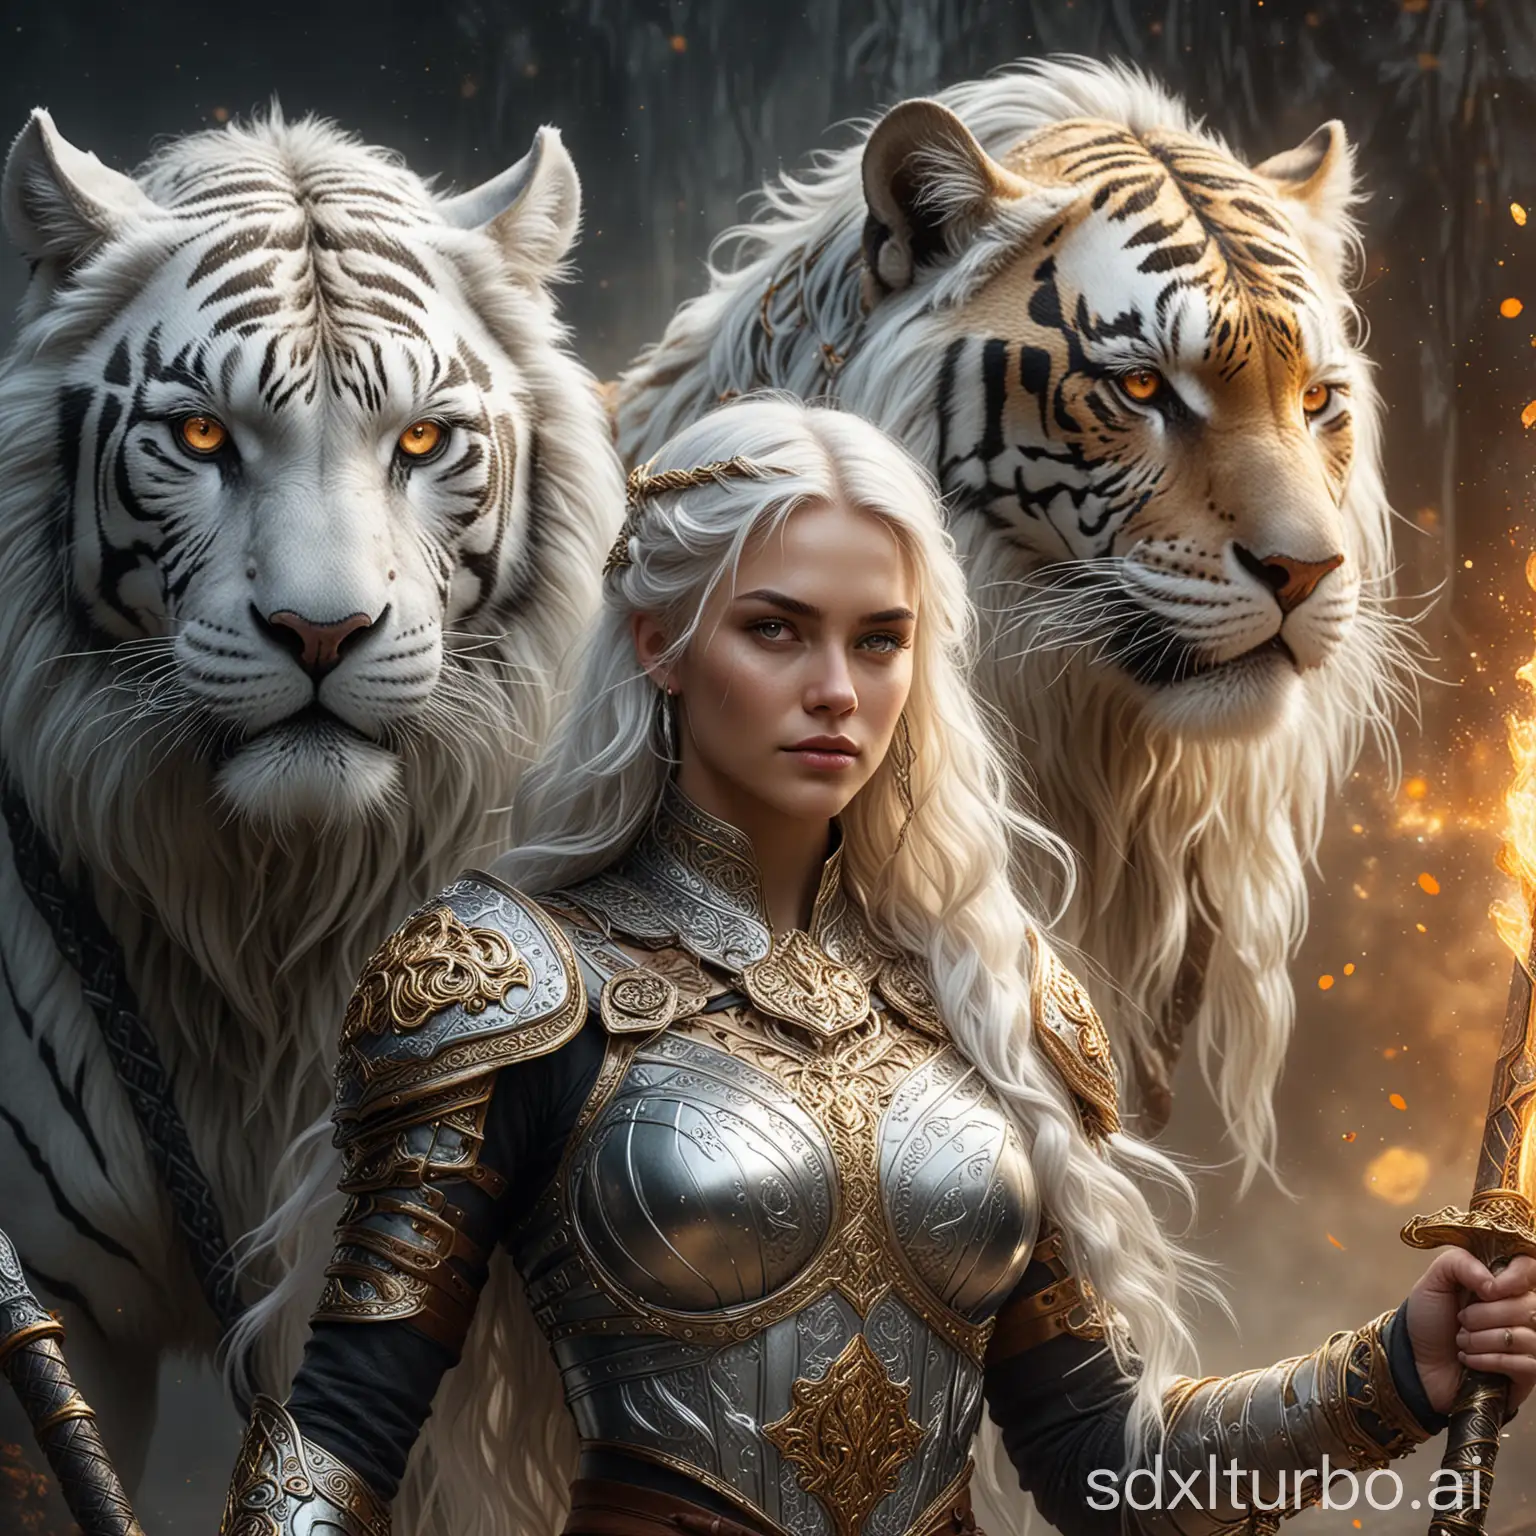 Silverarmored-Viking-Warrior-with-Flaming-Sword-and-Filigree-Tiger